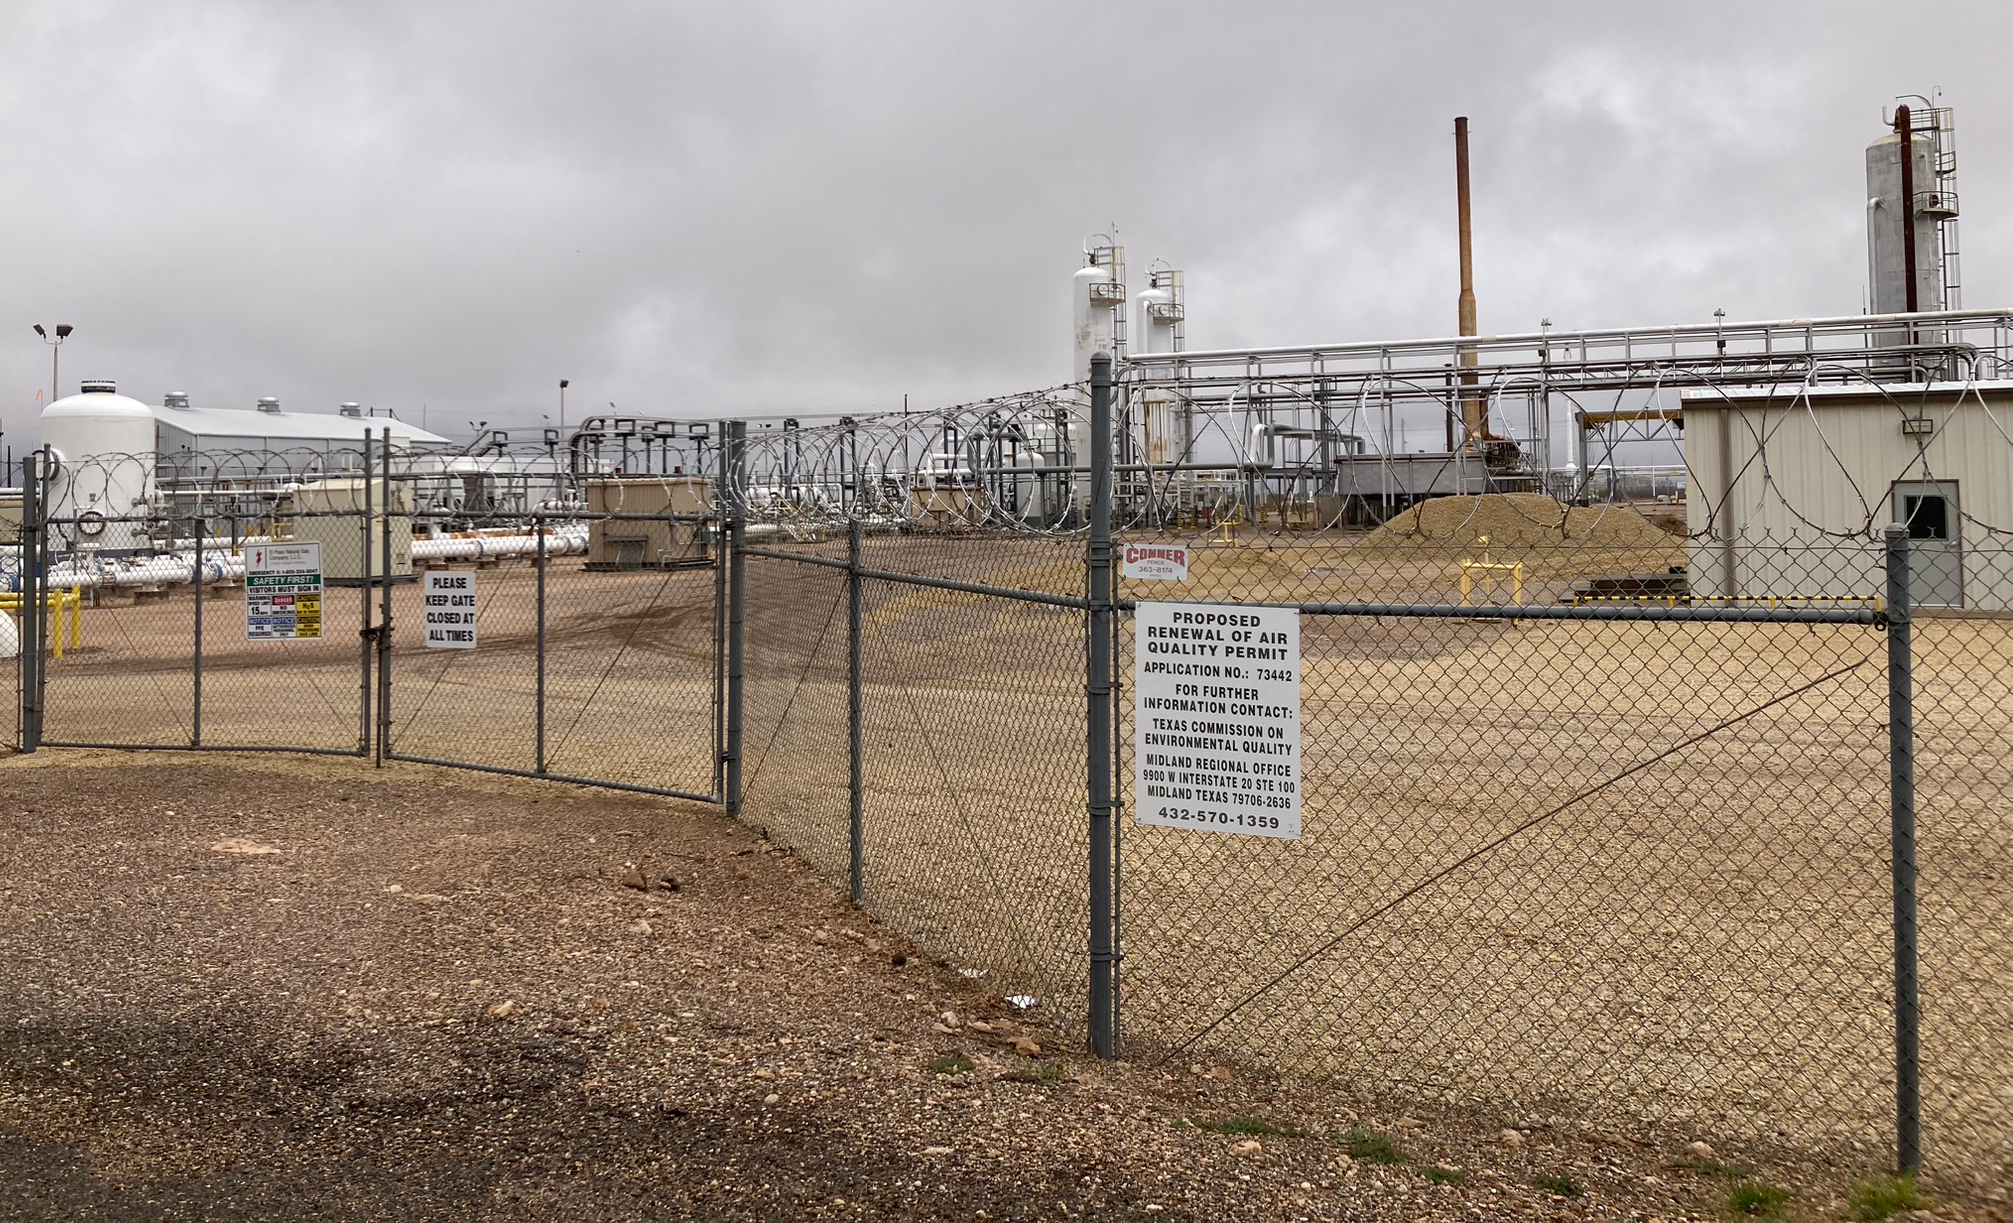 A view of the El Paso Natural Gas Company Waha station, owned by Kinder Morgan, near the Waha Hub in Pecos County, Texas. The El Paso Natural Gas Company is a pipeline system that transports natural gas from the Permian Basin to California, Arizona, Nevada, New Mexico, Oklahoma, Texas and Northern Mexico.